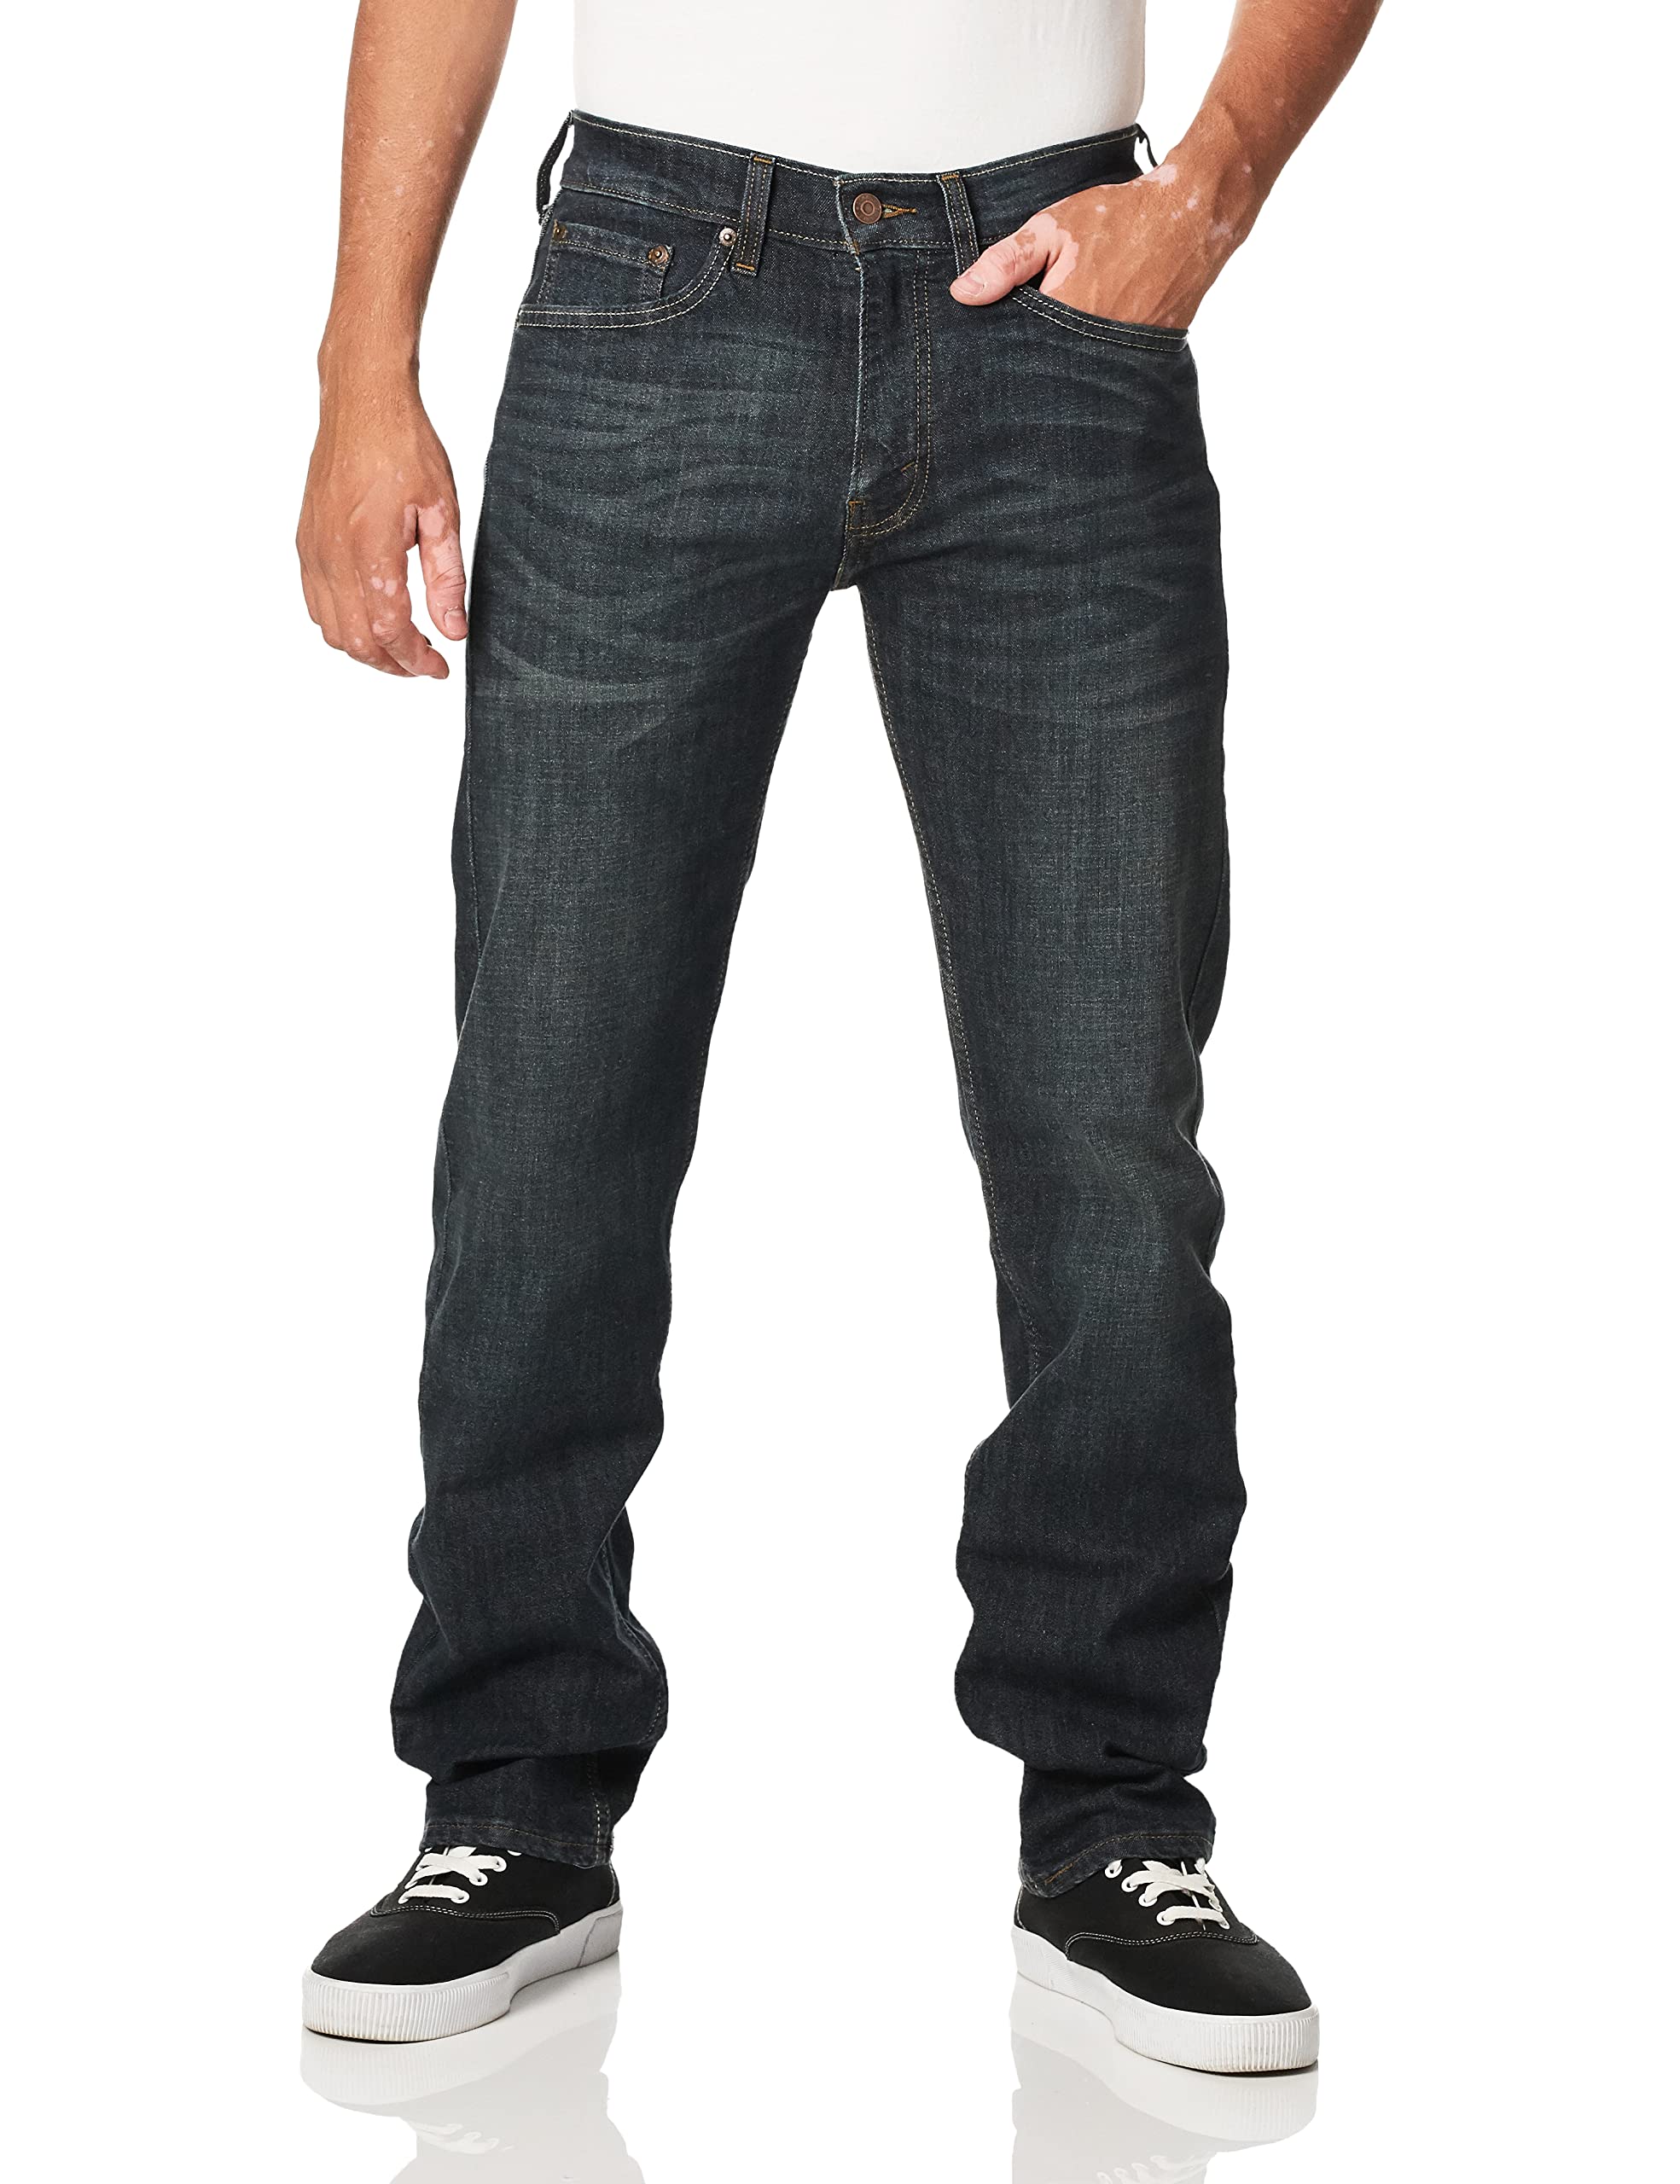 Signature by Levi Strauss & Co. Gold Label Men's Regular Fit Flex Jeans (Available in Big & Tall)